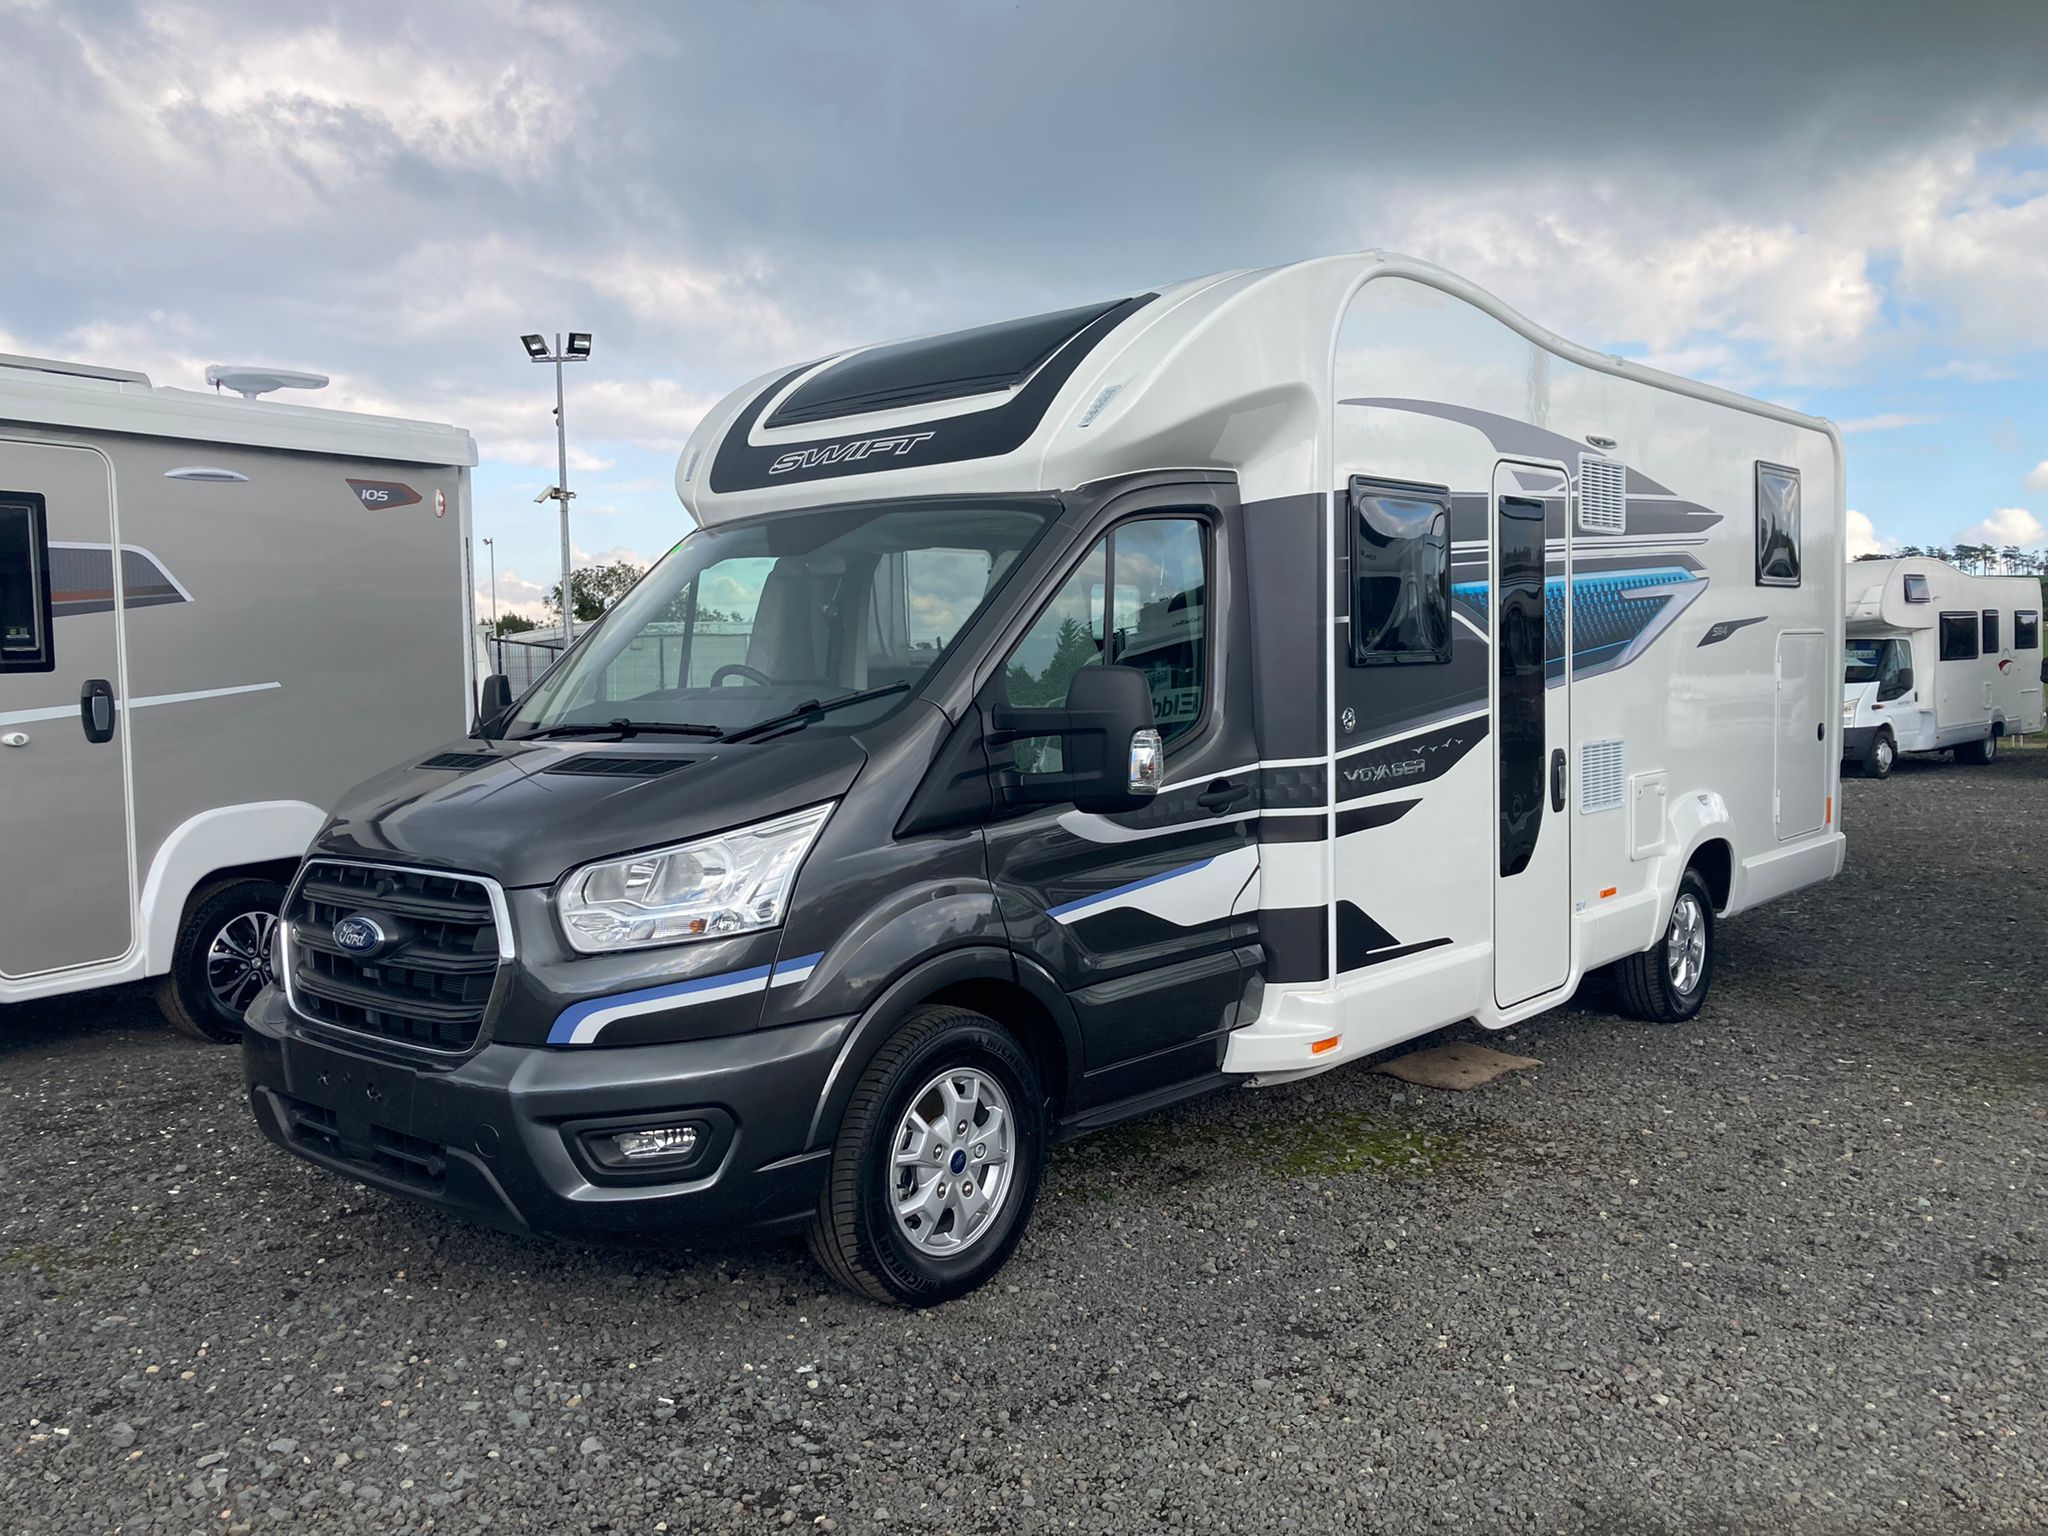 New Swift Voyager 584